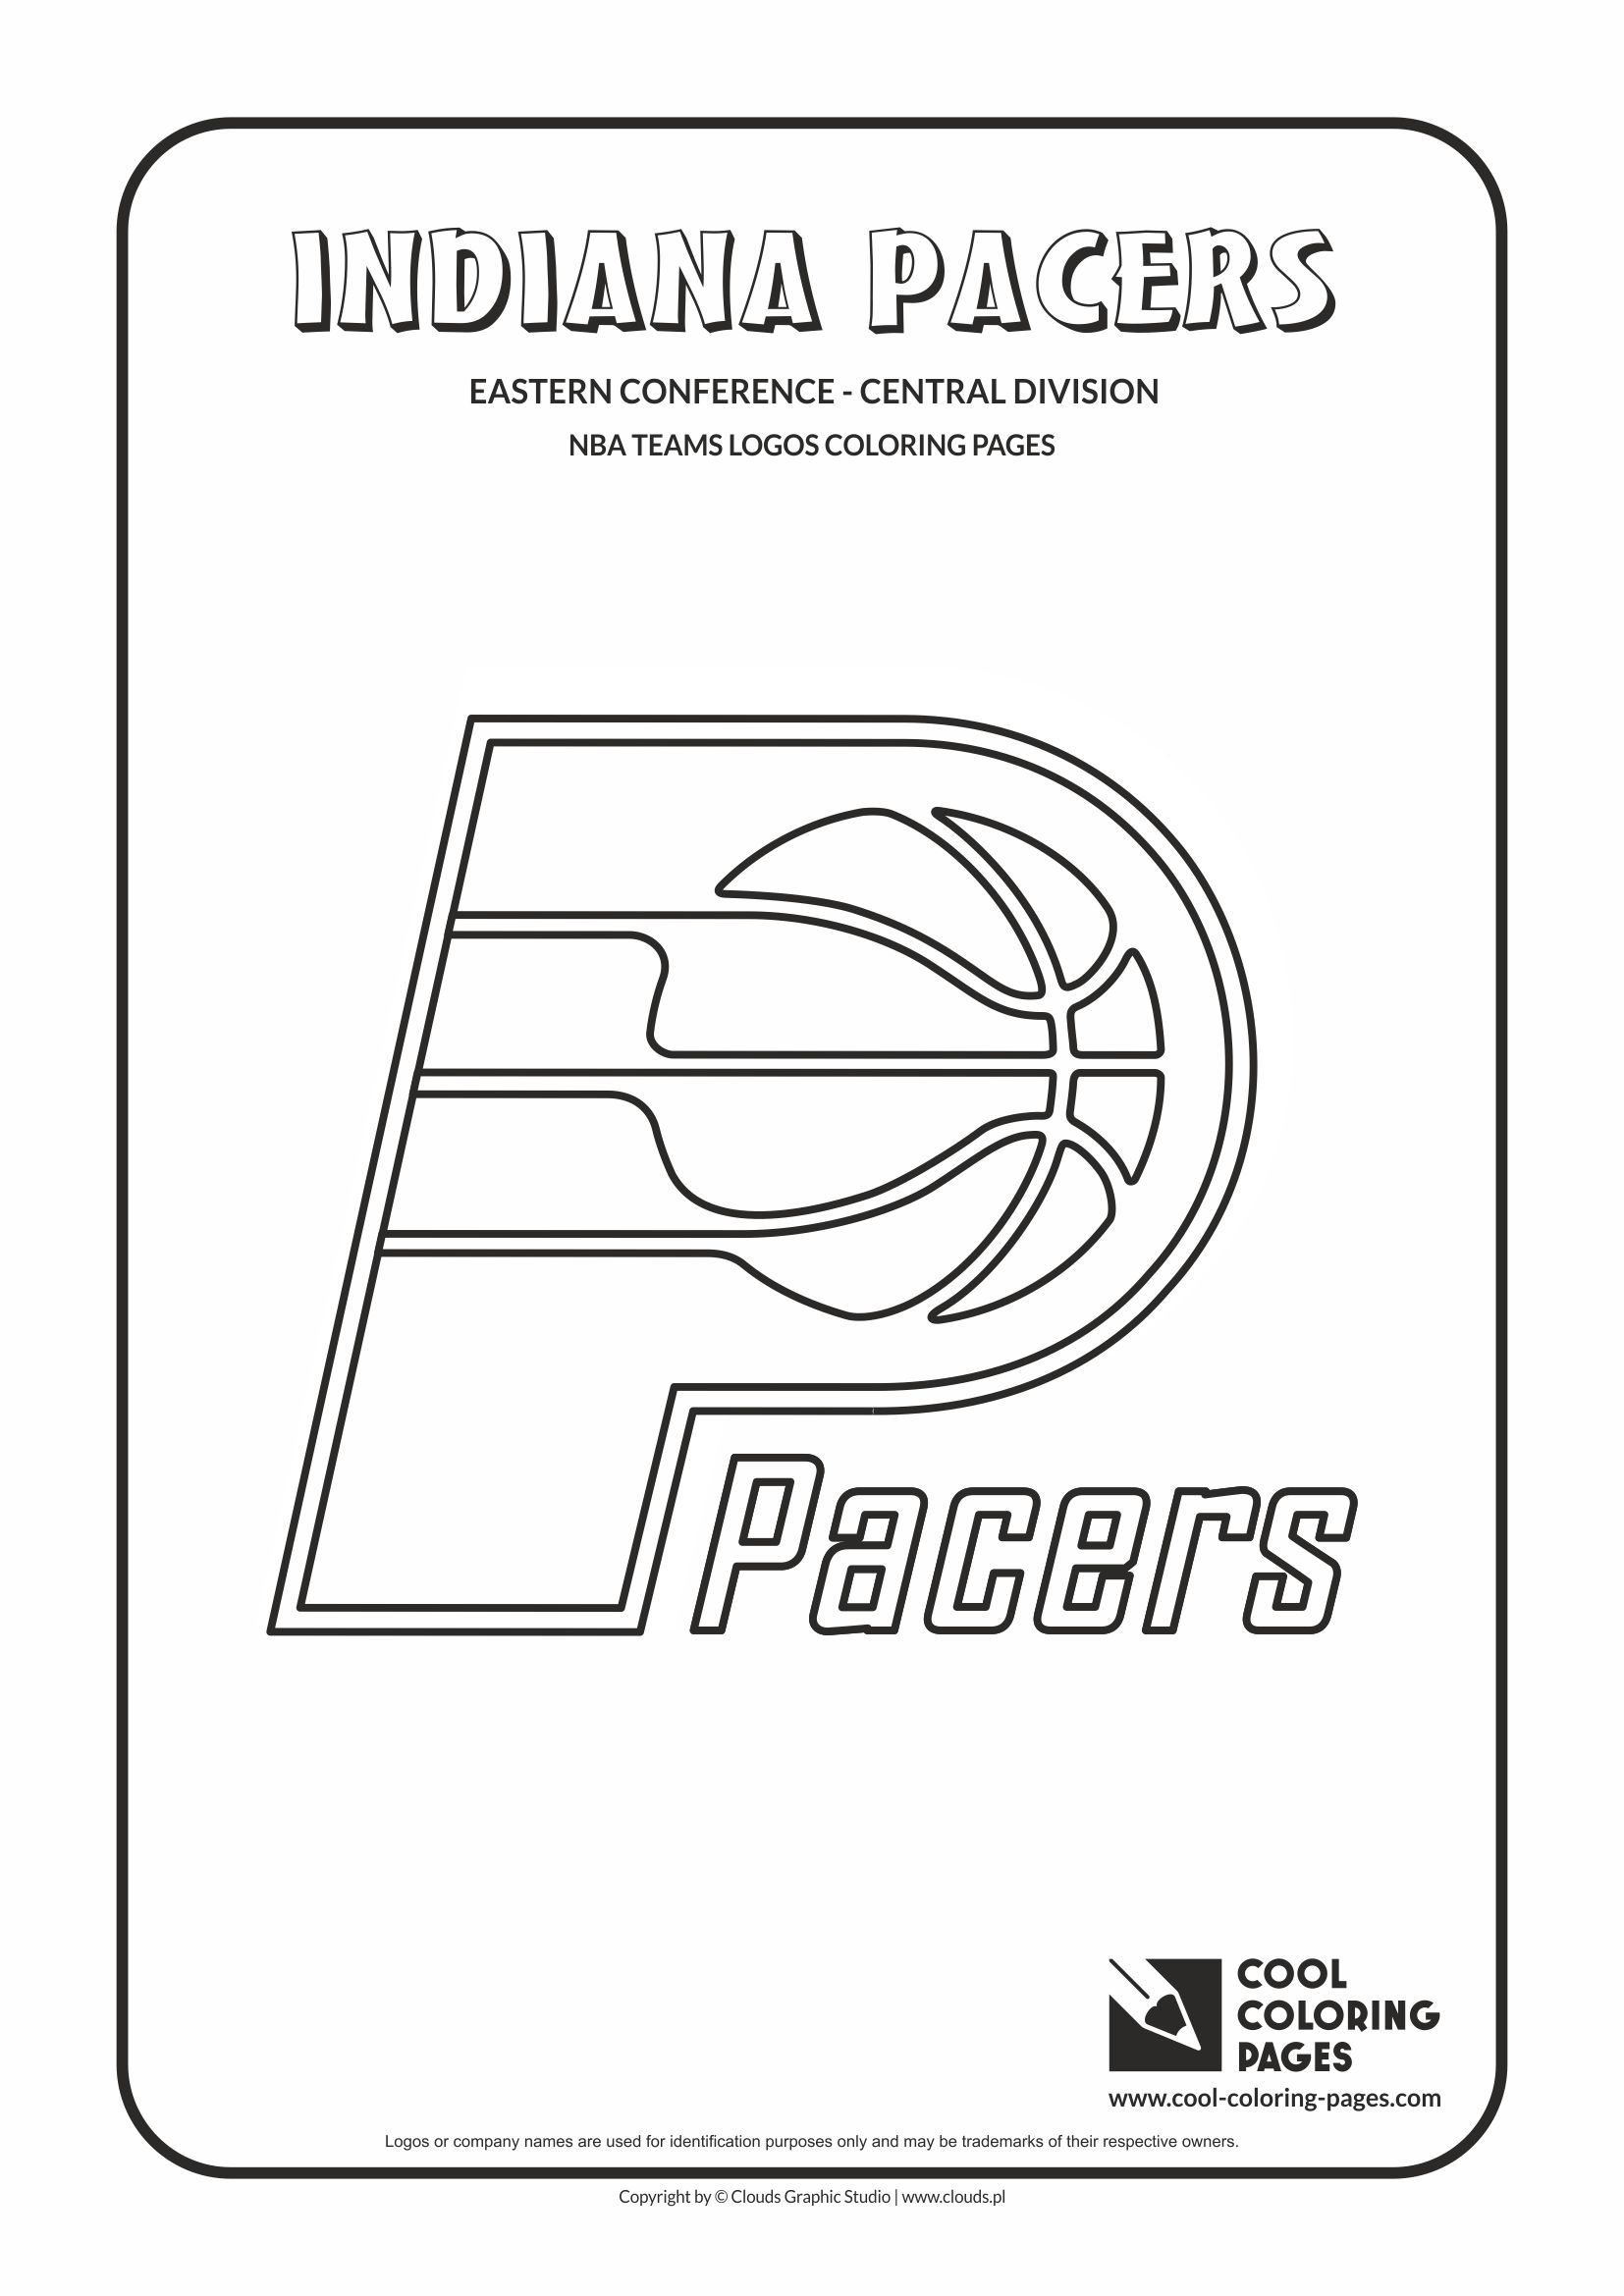 Cool Coloring Pages Indiana Pacers - NBA basketball teams logos coloring pages - Cool ...1654 x 2339